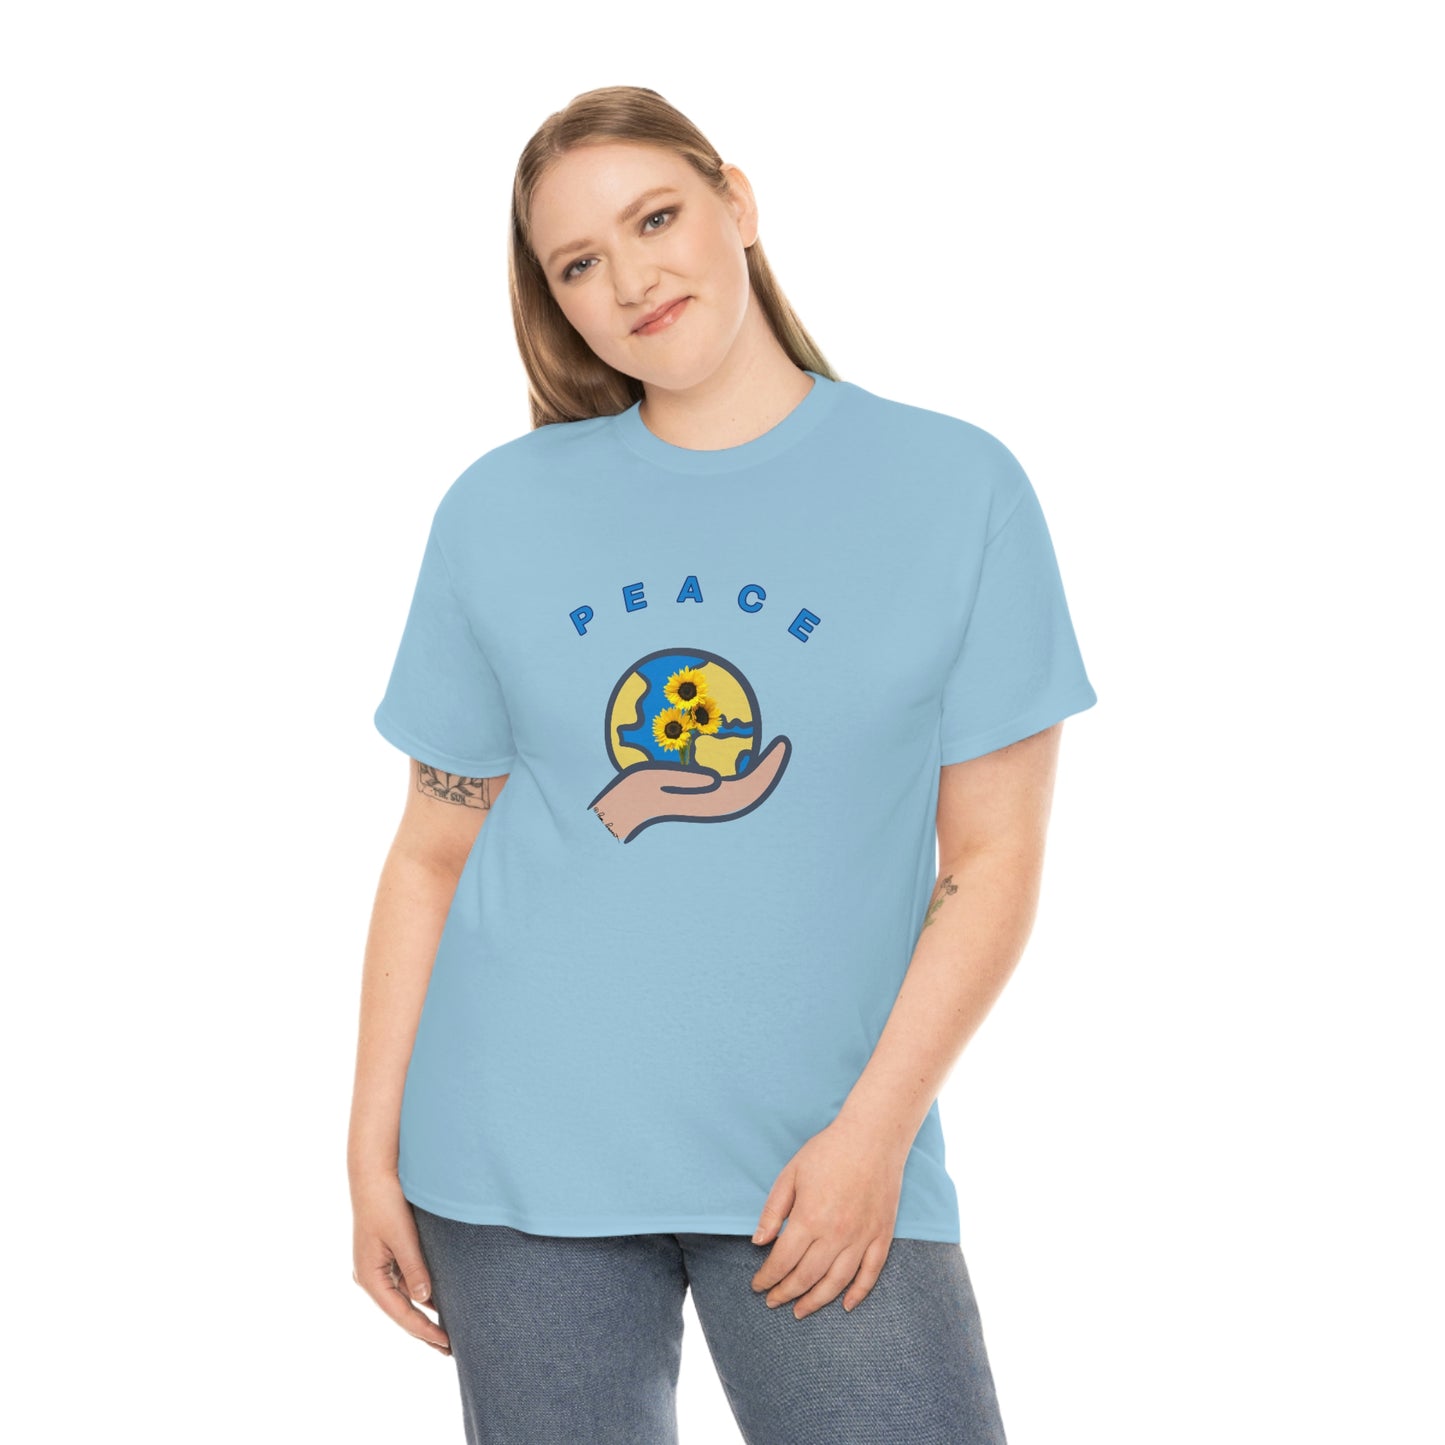 Mock up of the light blue t-shirt worn by a blonde-haired woman